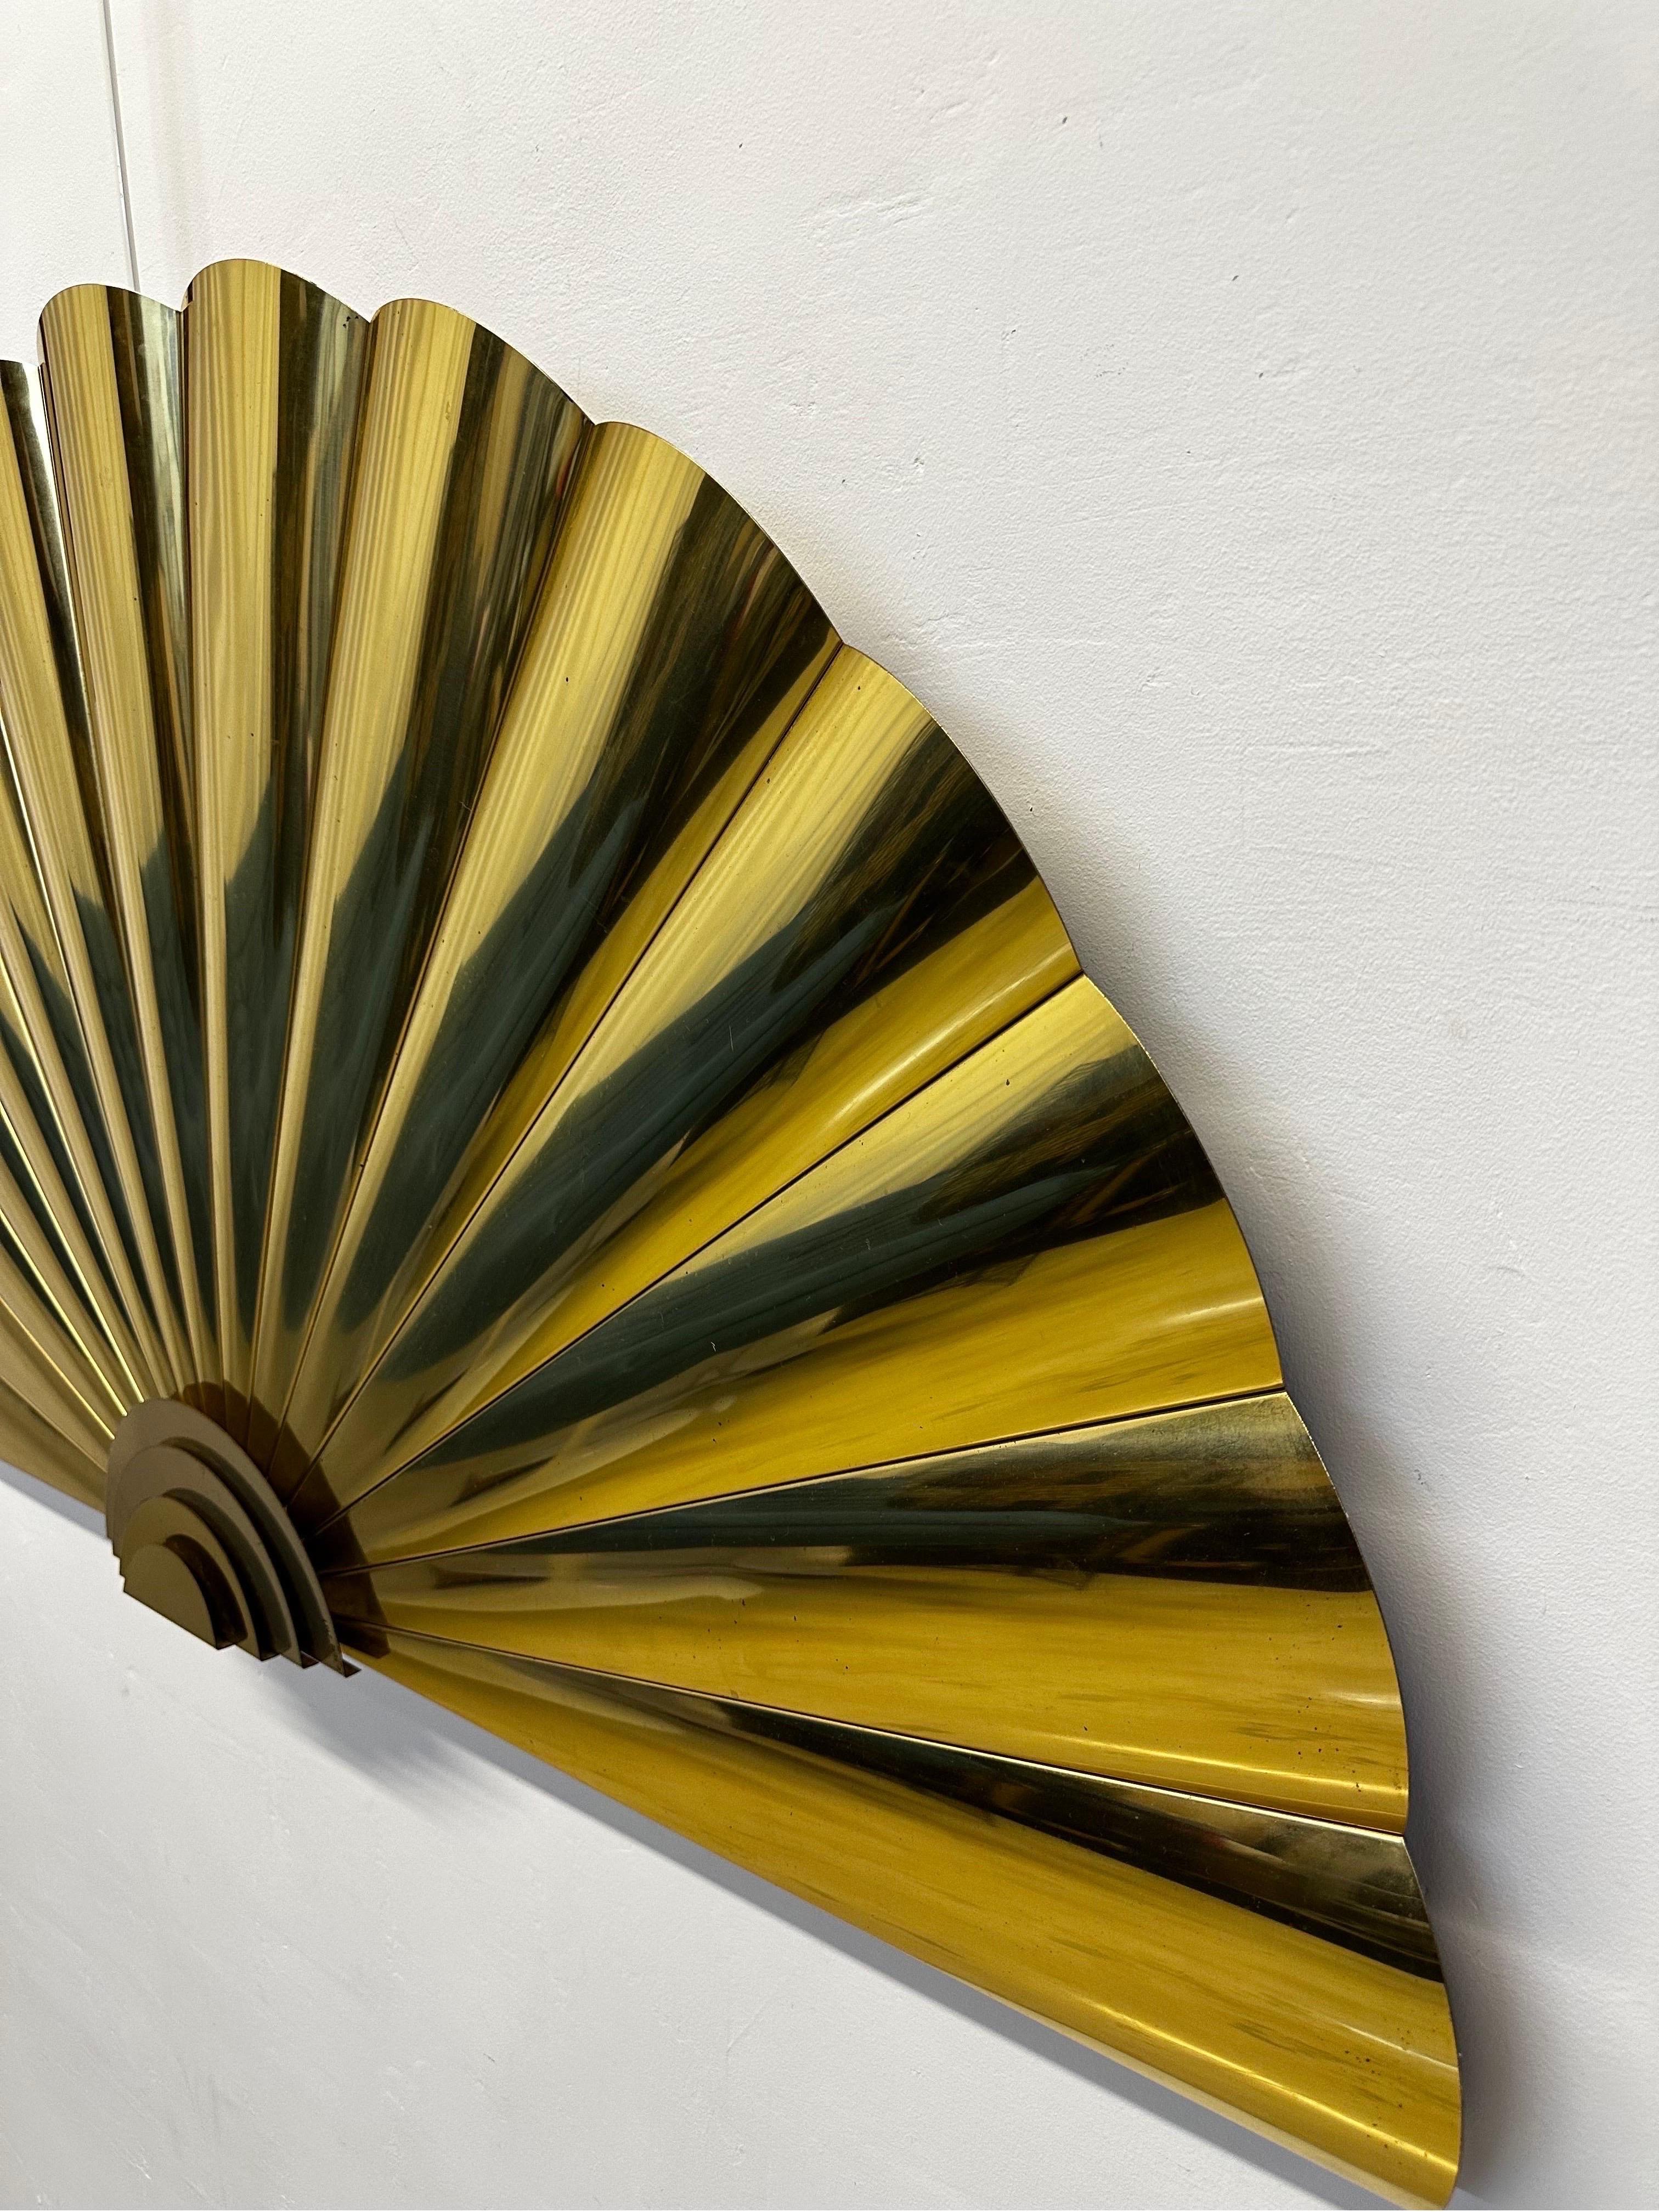 Metal Curtis Jere Artisan House Large Brass Fan Wall Sculpture, 1989 For Sale